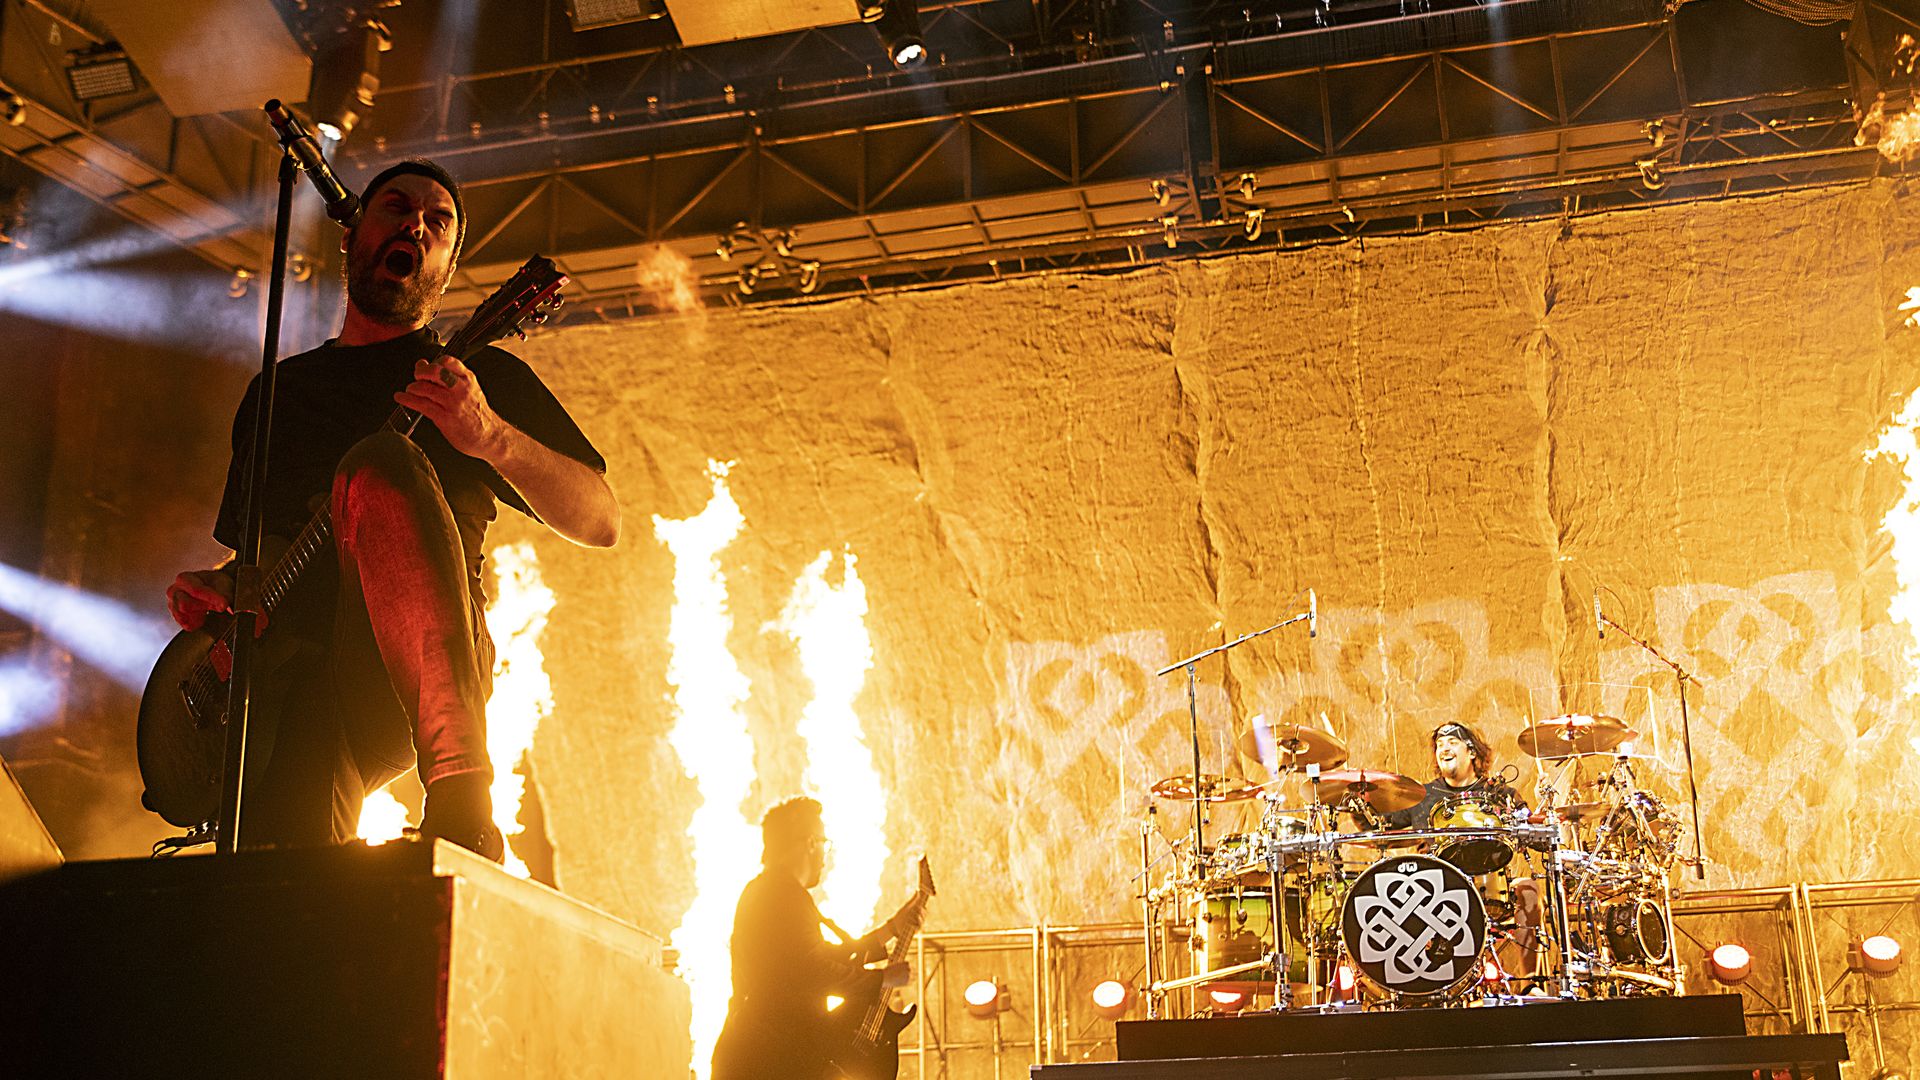 A guitarist singing while fire shoots out on stage behind a drummer in the back